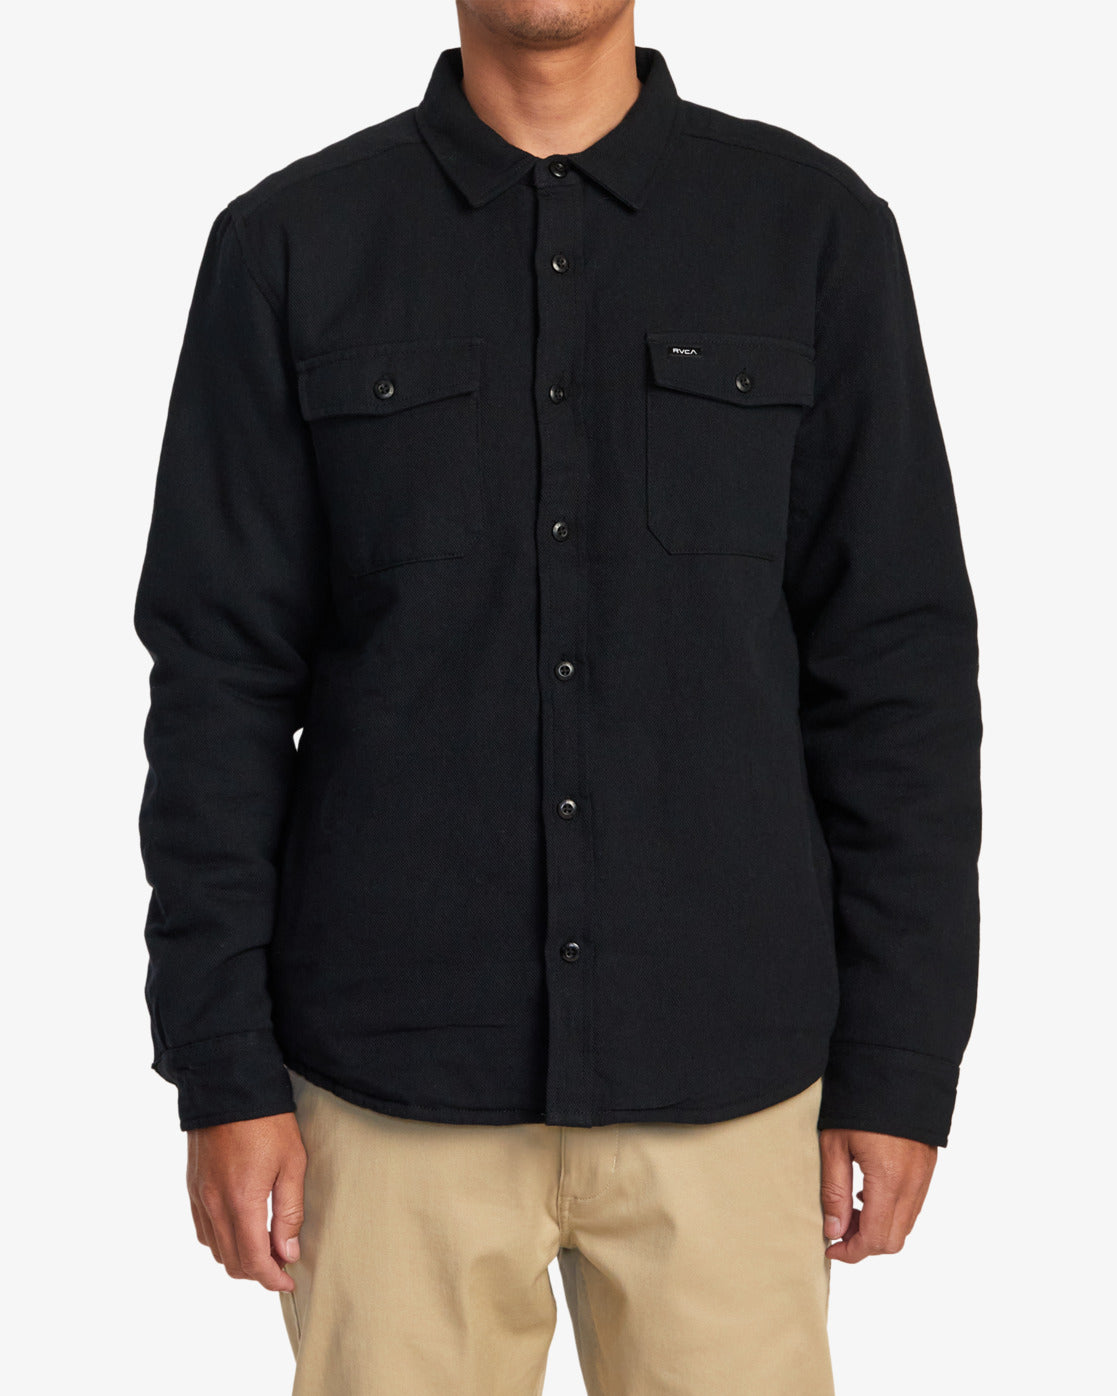 INSTRUMENT QUILTED FLANNEL SHIRT